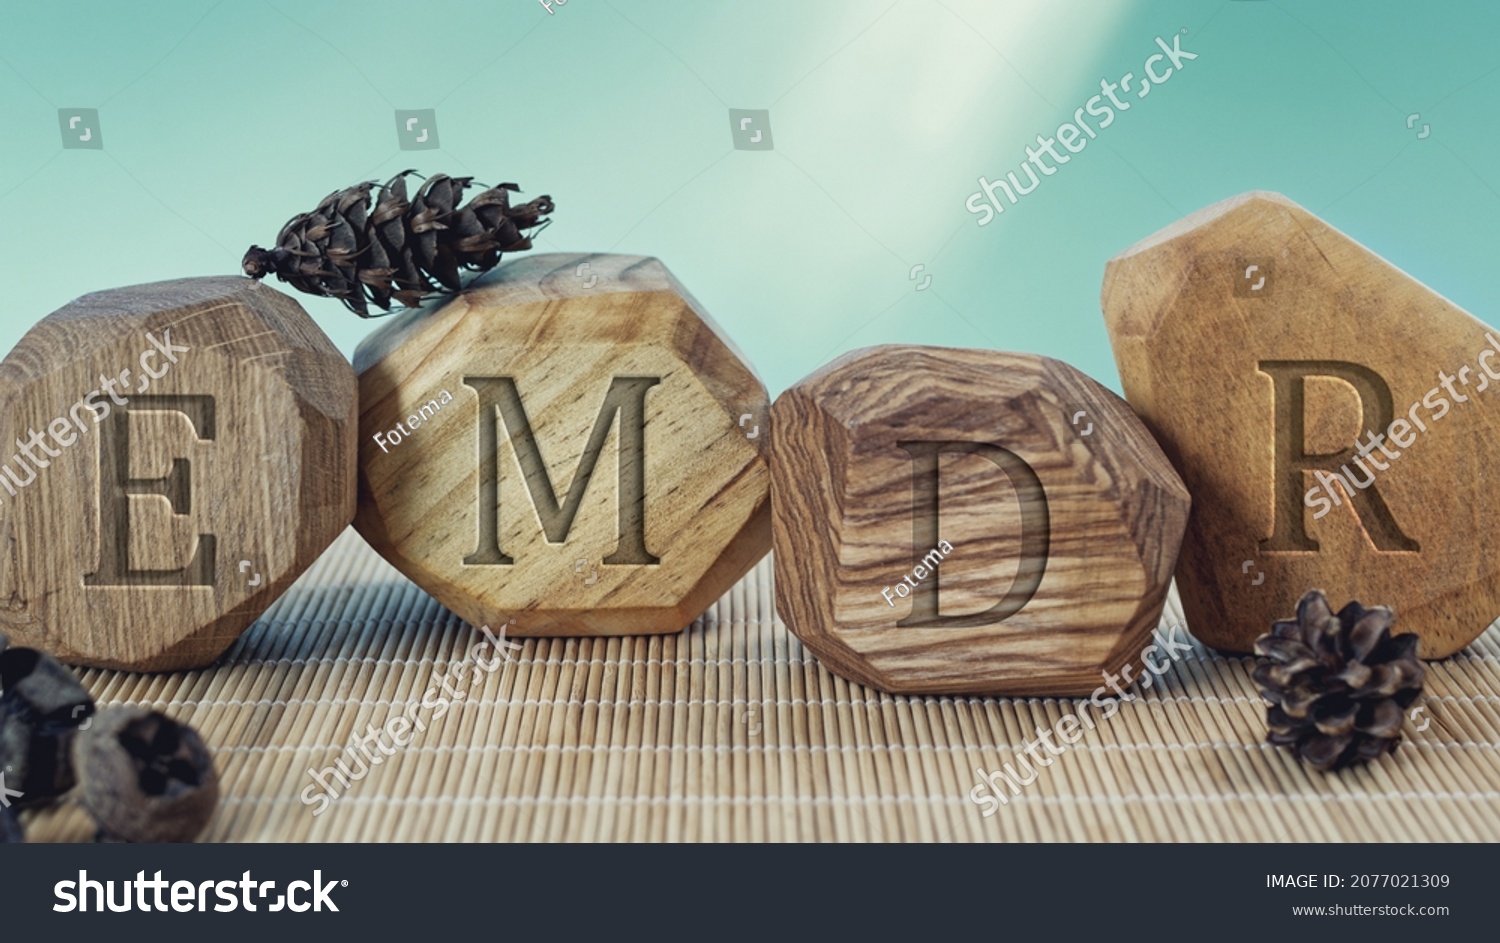 Letters EMDR written on wooden irregular blocks. Eye Movement Desensitization and Reprocessing psychotherapy treatment concept. #2077021309